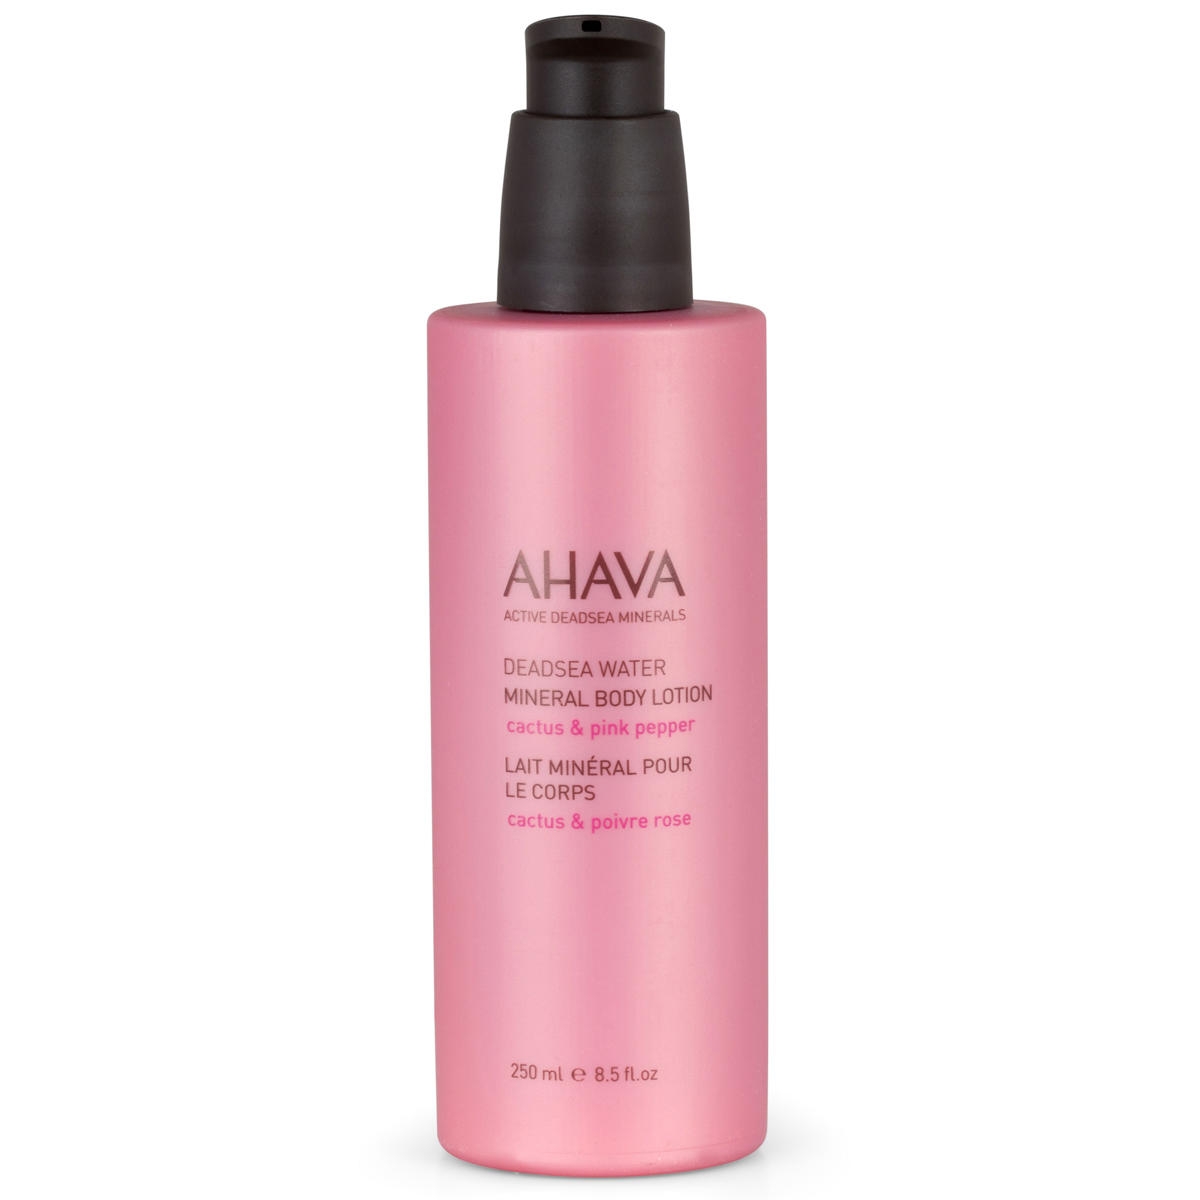 AHAVA Mineral Body Lotion - Cactus and Pink Pepper - 1